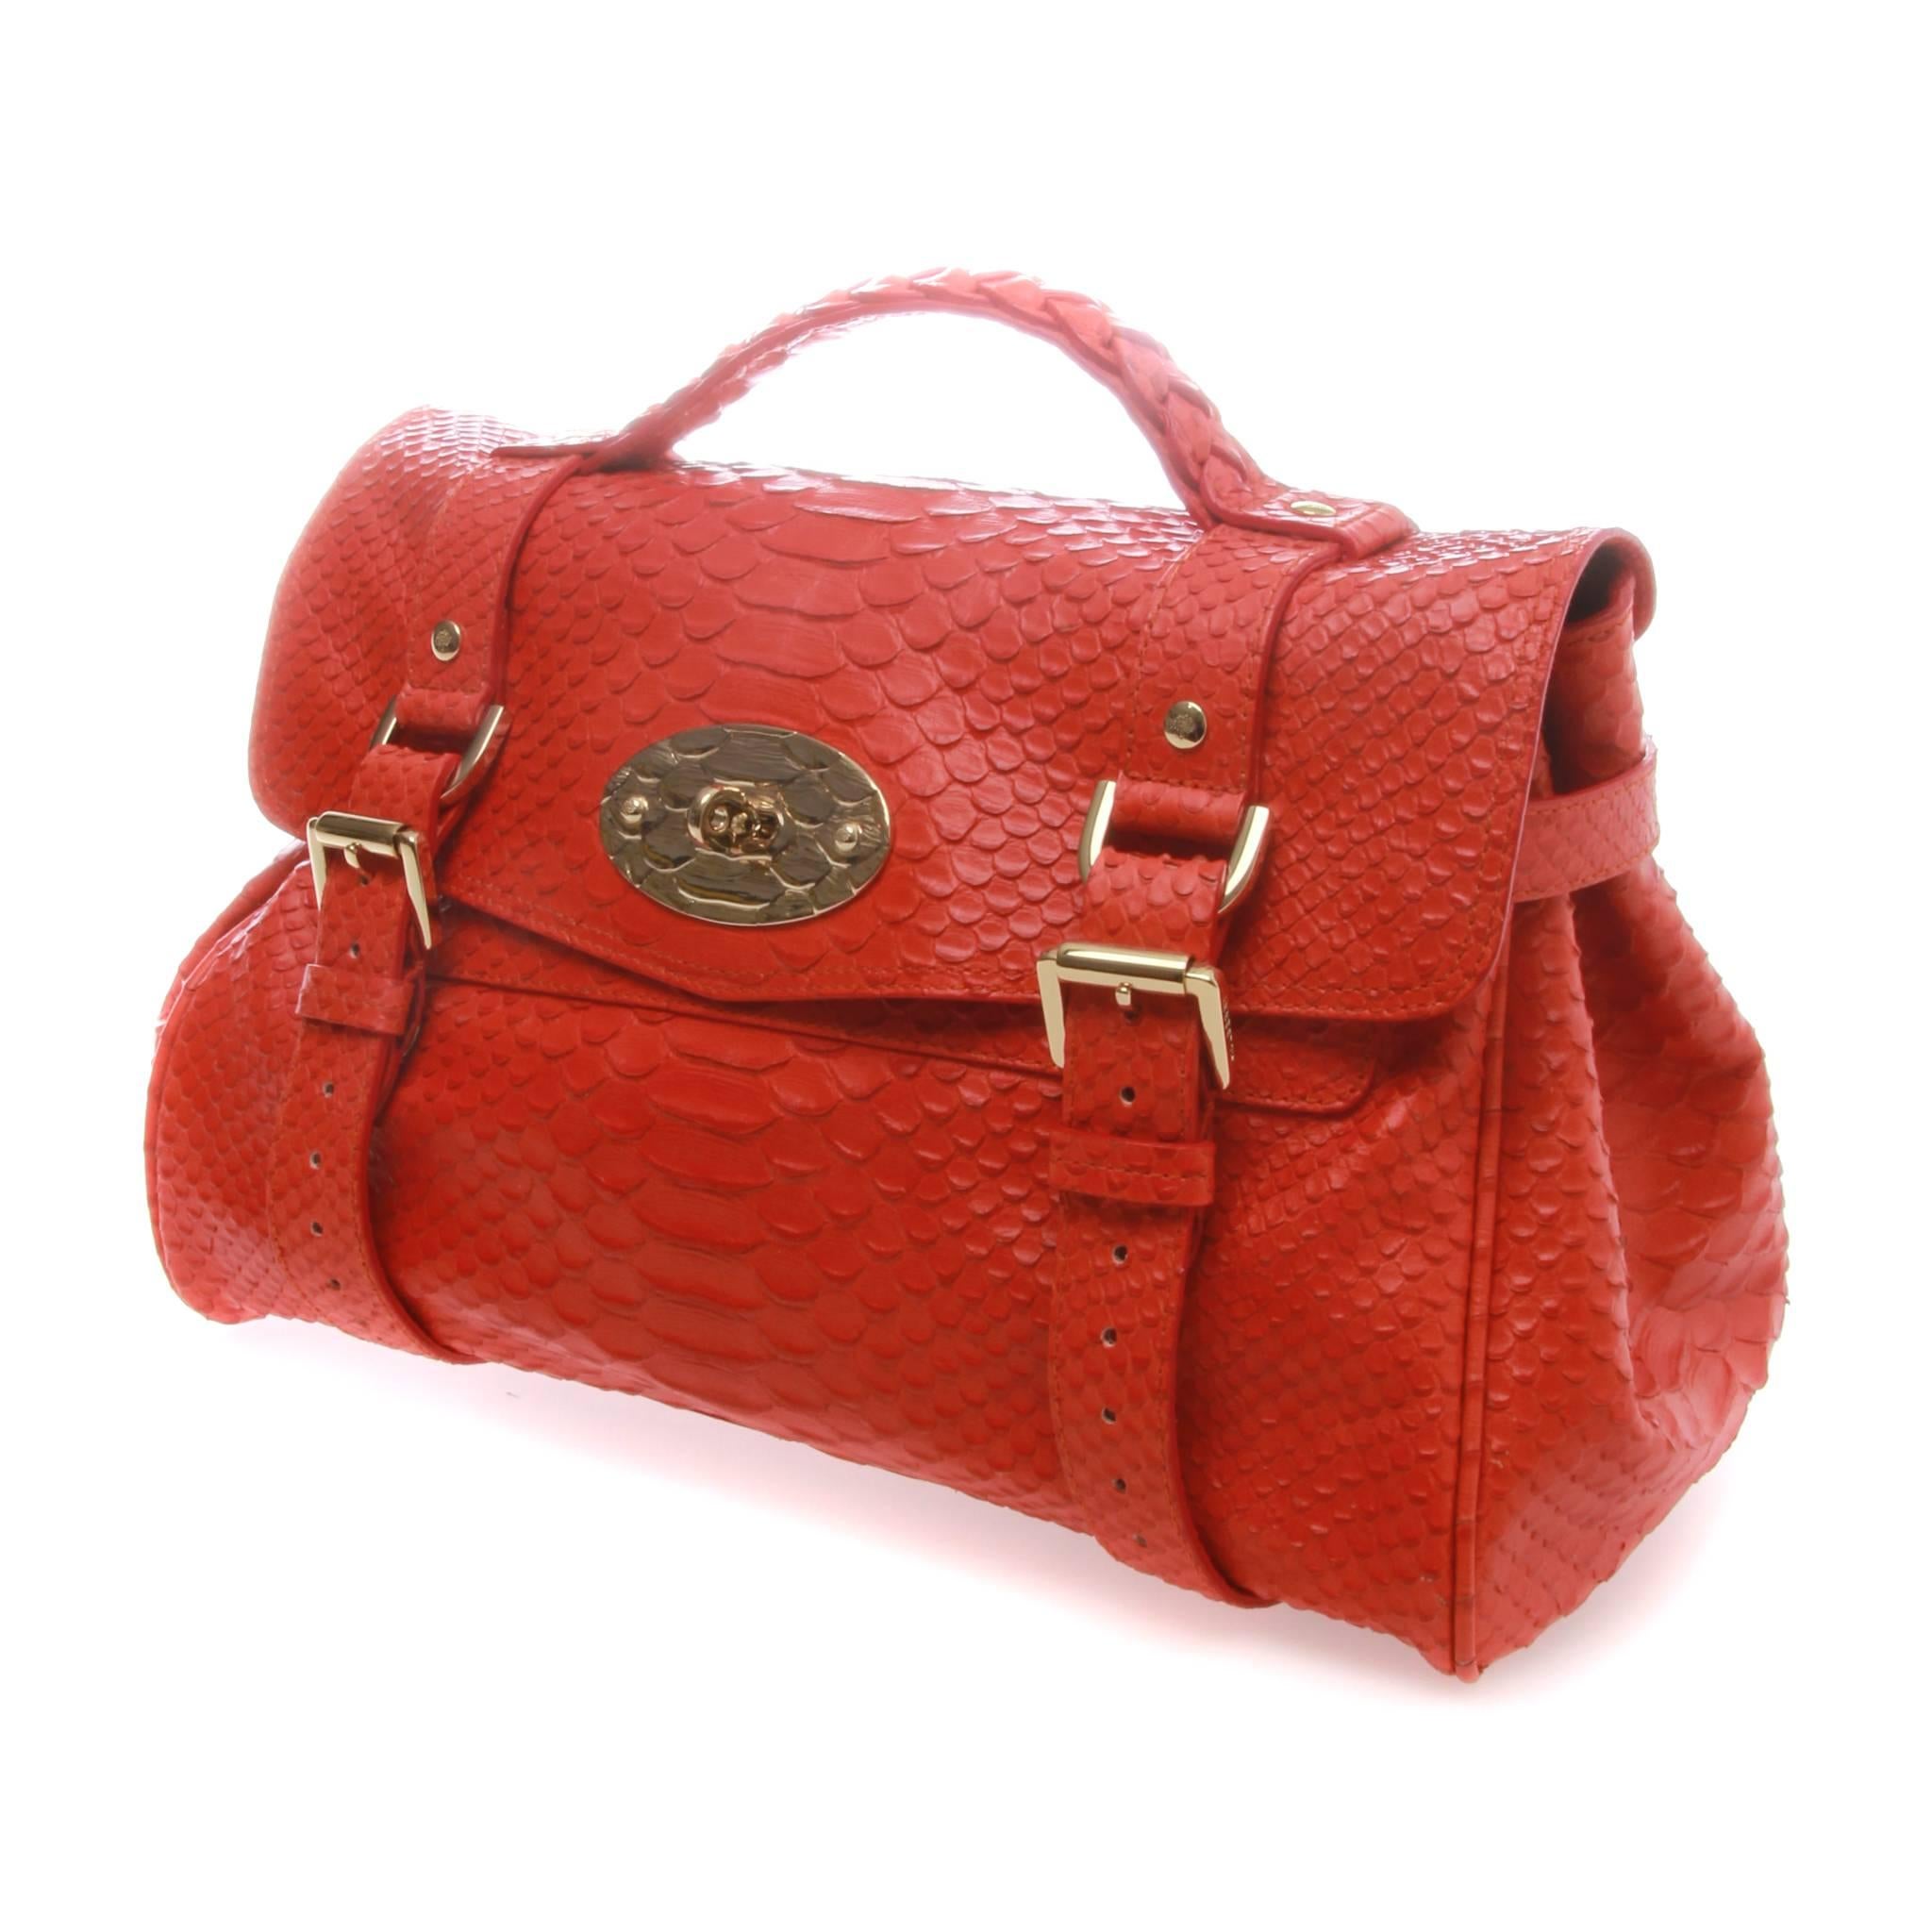 FINAL SALE

Mulberry Alexa satchel in a silky textured snakeskin look leather. 

The bag features a leather top handle with an adjustable shoulder strap a cross over flap with belts, and buckles, links and a turn lock in a lovely faux snake brass.